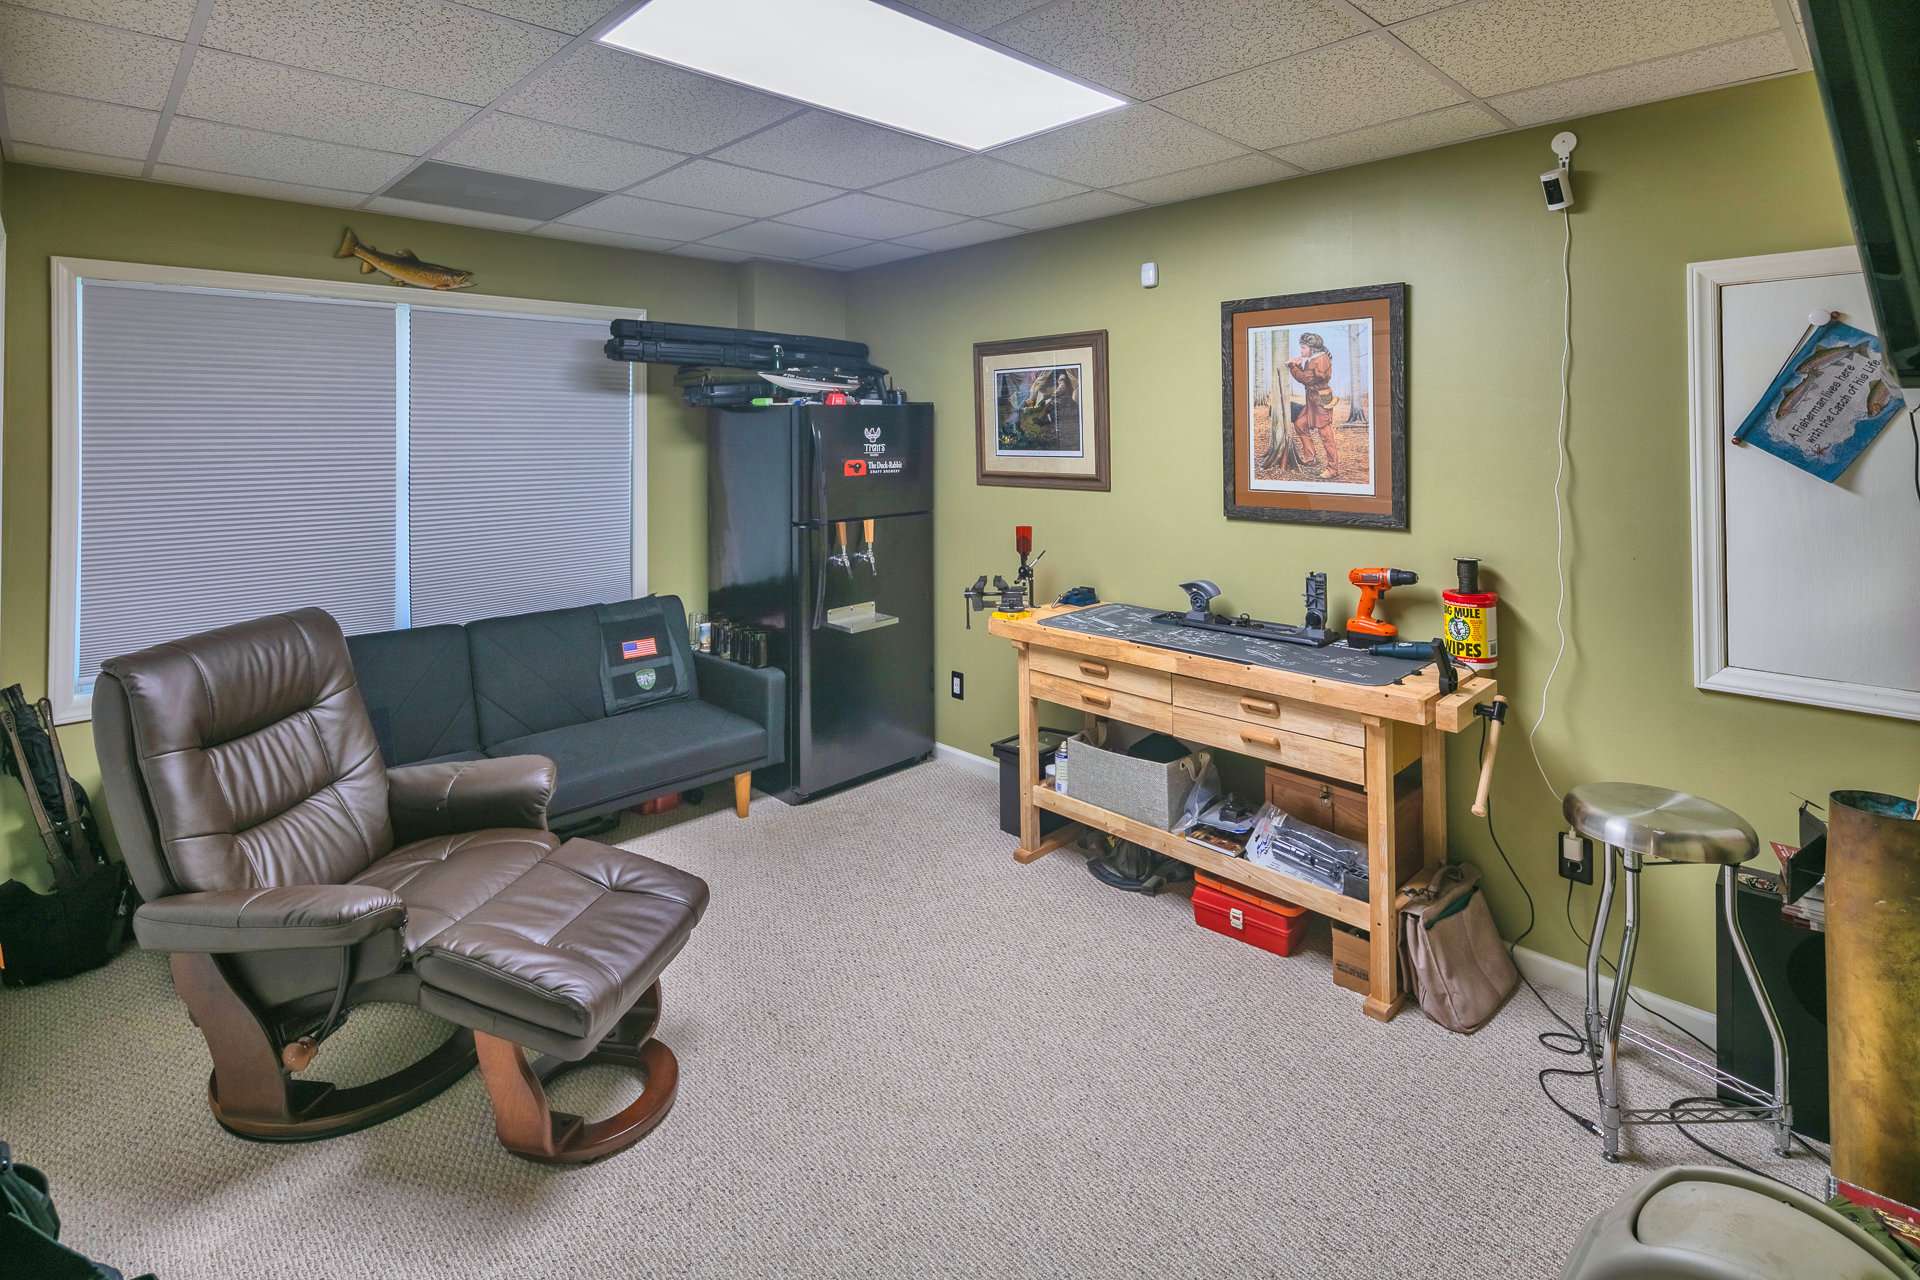 This lower level bonus room is ideal for hobby/crafting room, office, or additional sleeping space. The double doors access the garage area.